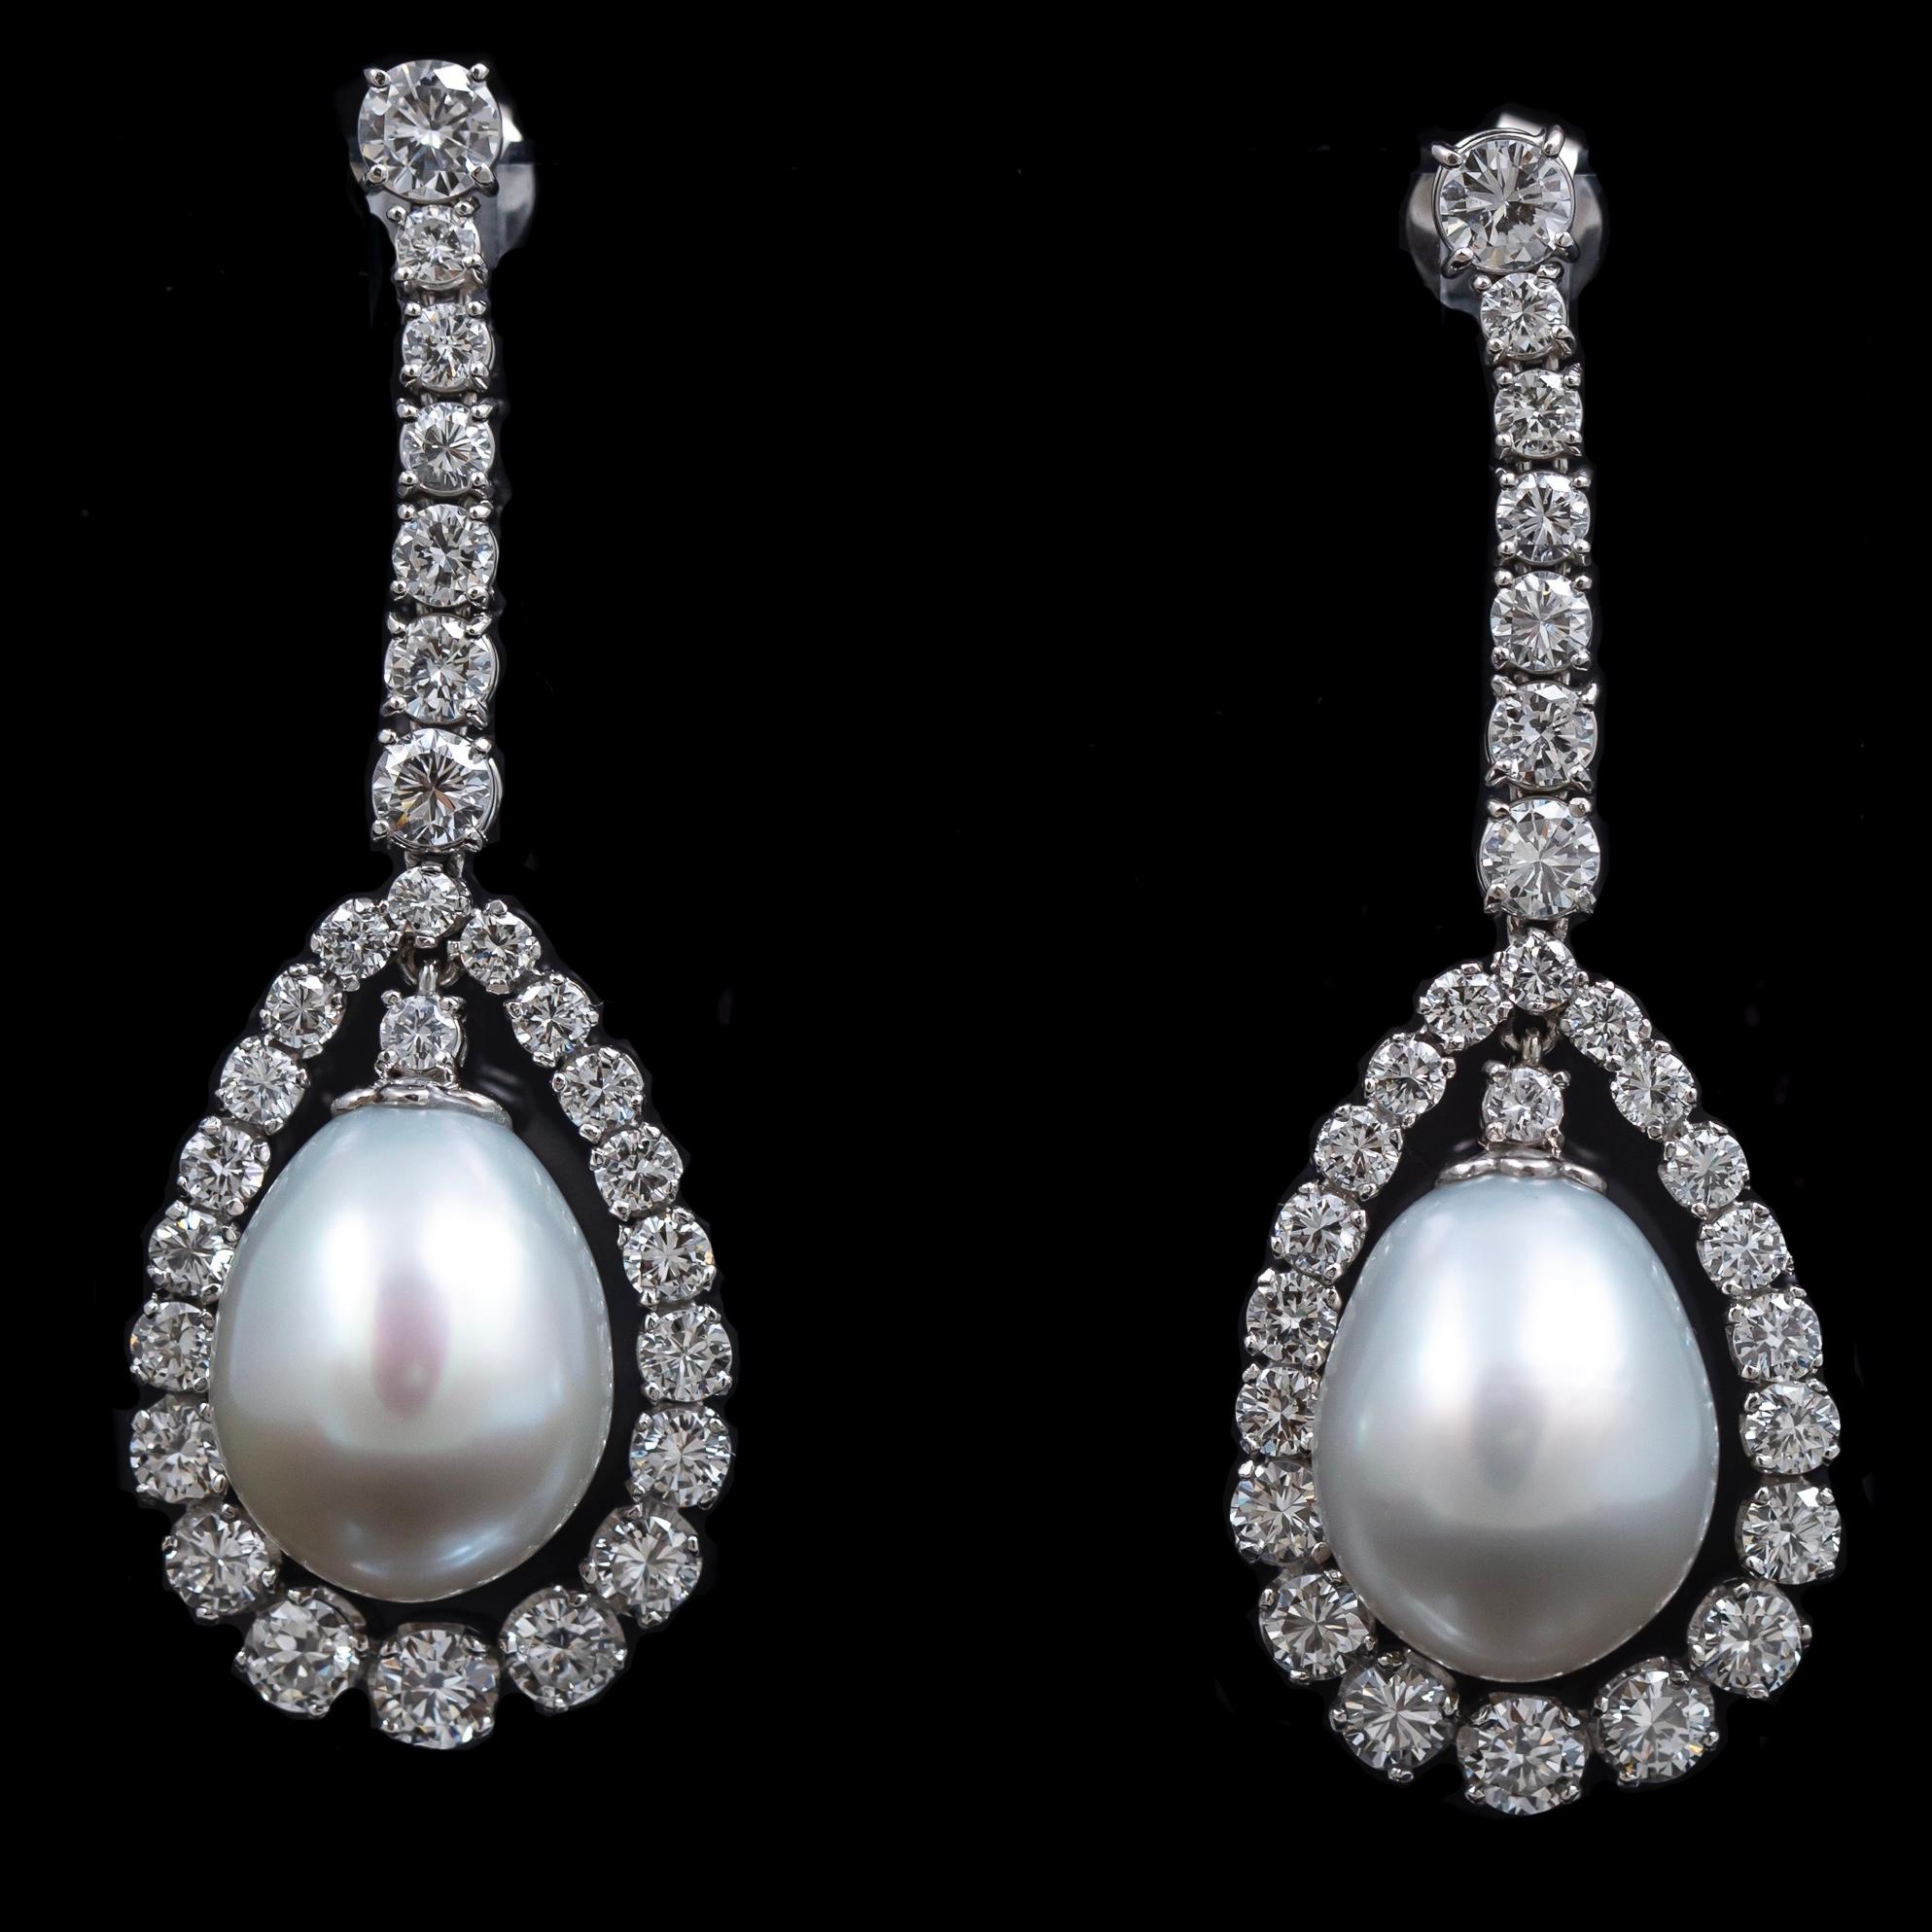 Vintage cultured pearl and diamond drop earrings in white gold, second half of the 20th century. Each earring is composed by na articulated vertical line of individually claw-set round brilliant-cut diamonds suspending a drop-shape cultured pearl